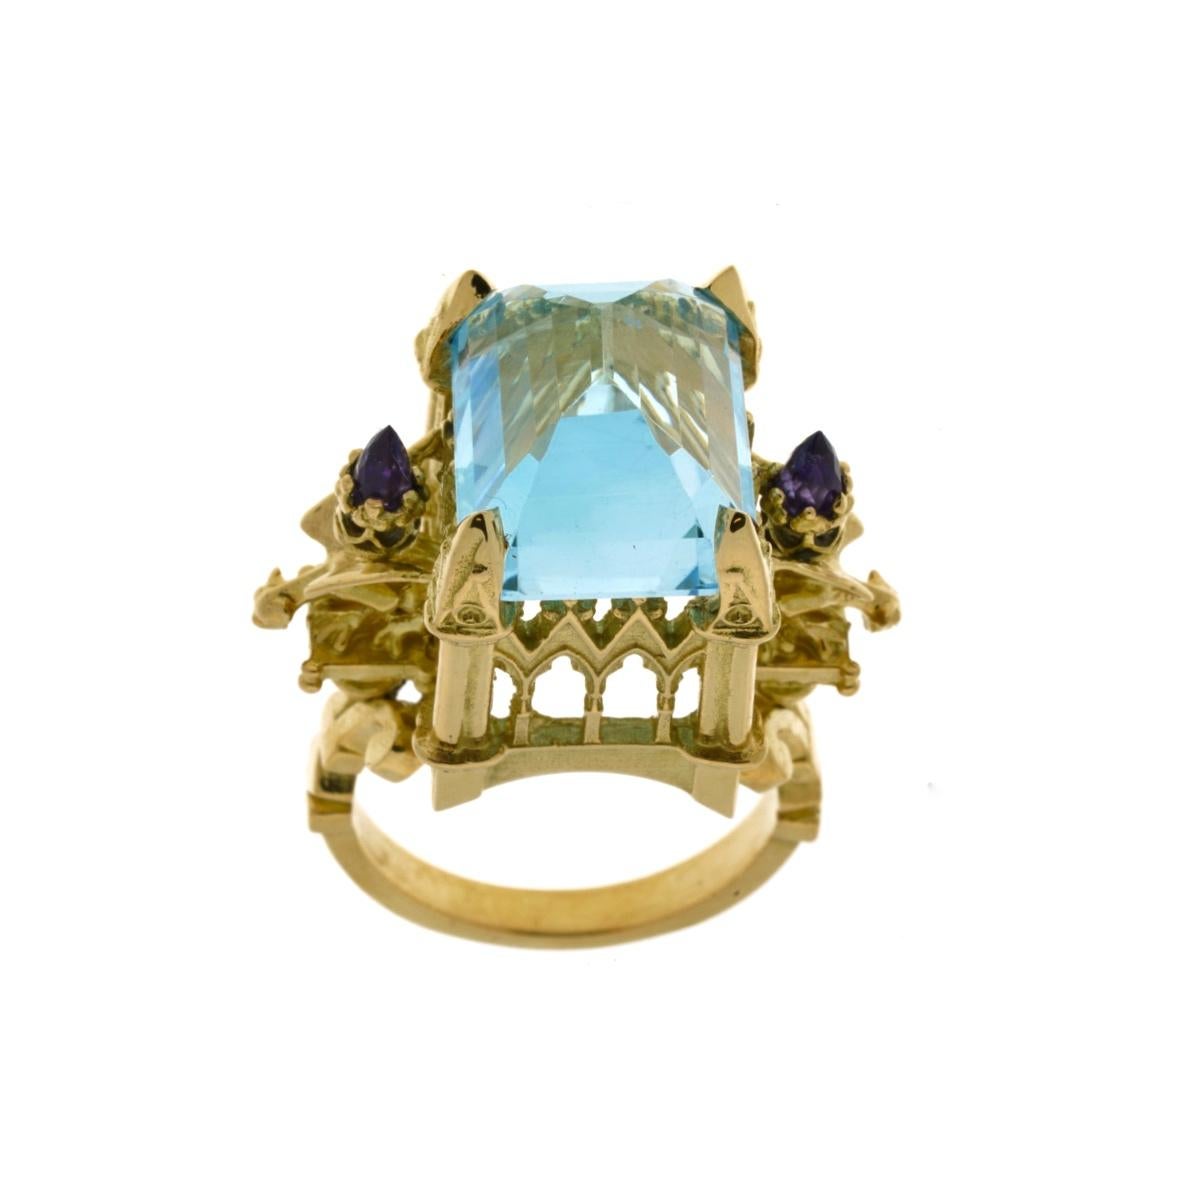 La Gargouille Cathedral Ring is a truly wondrous one of a kind piece.

Handcrafted in 18kt yellow gold this glorious ring features a stunning central 15mm x 12mm crisp blue topaz, resplendent atop a signature William Llewellyn Griffiths cathedral